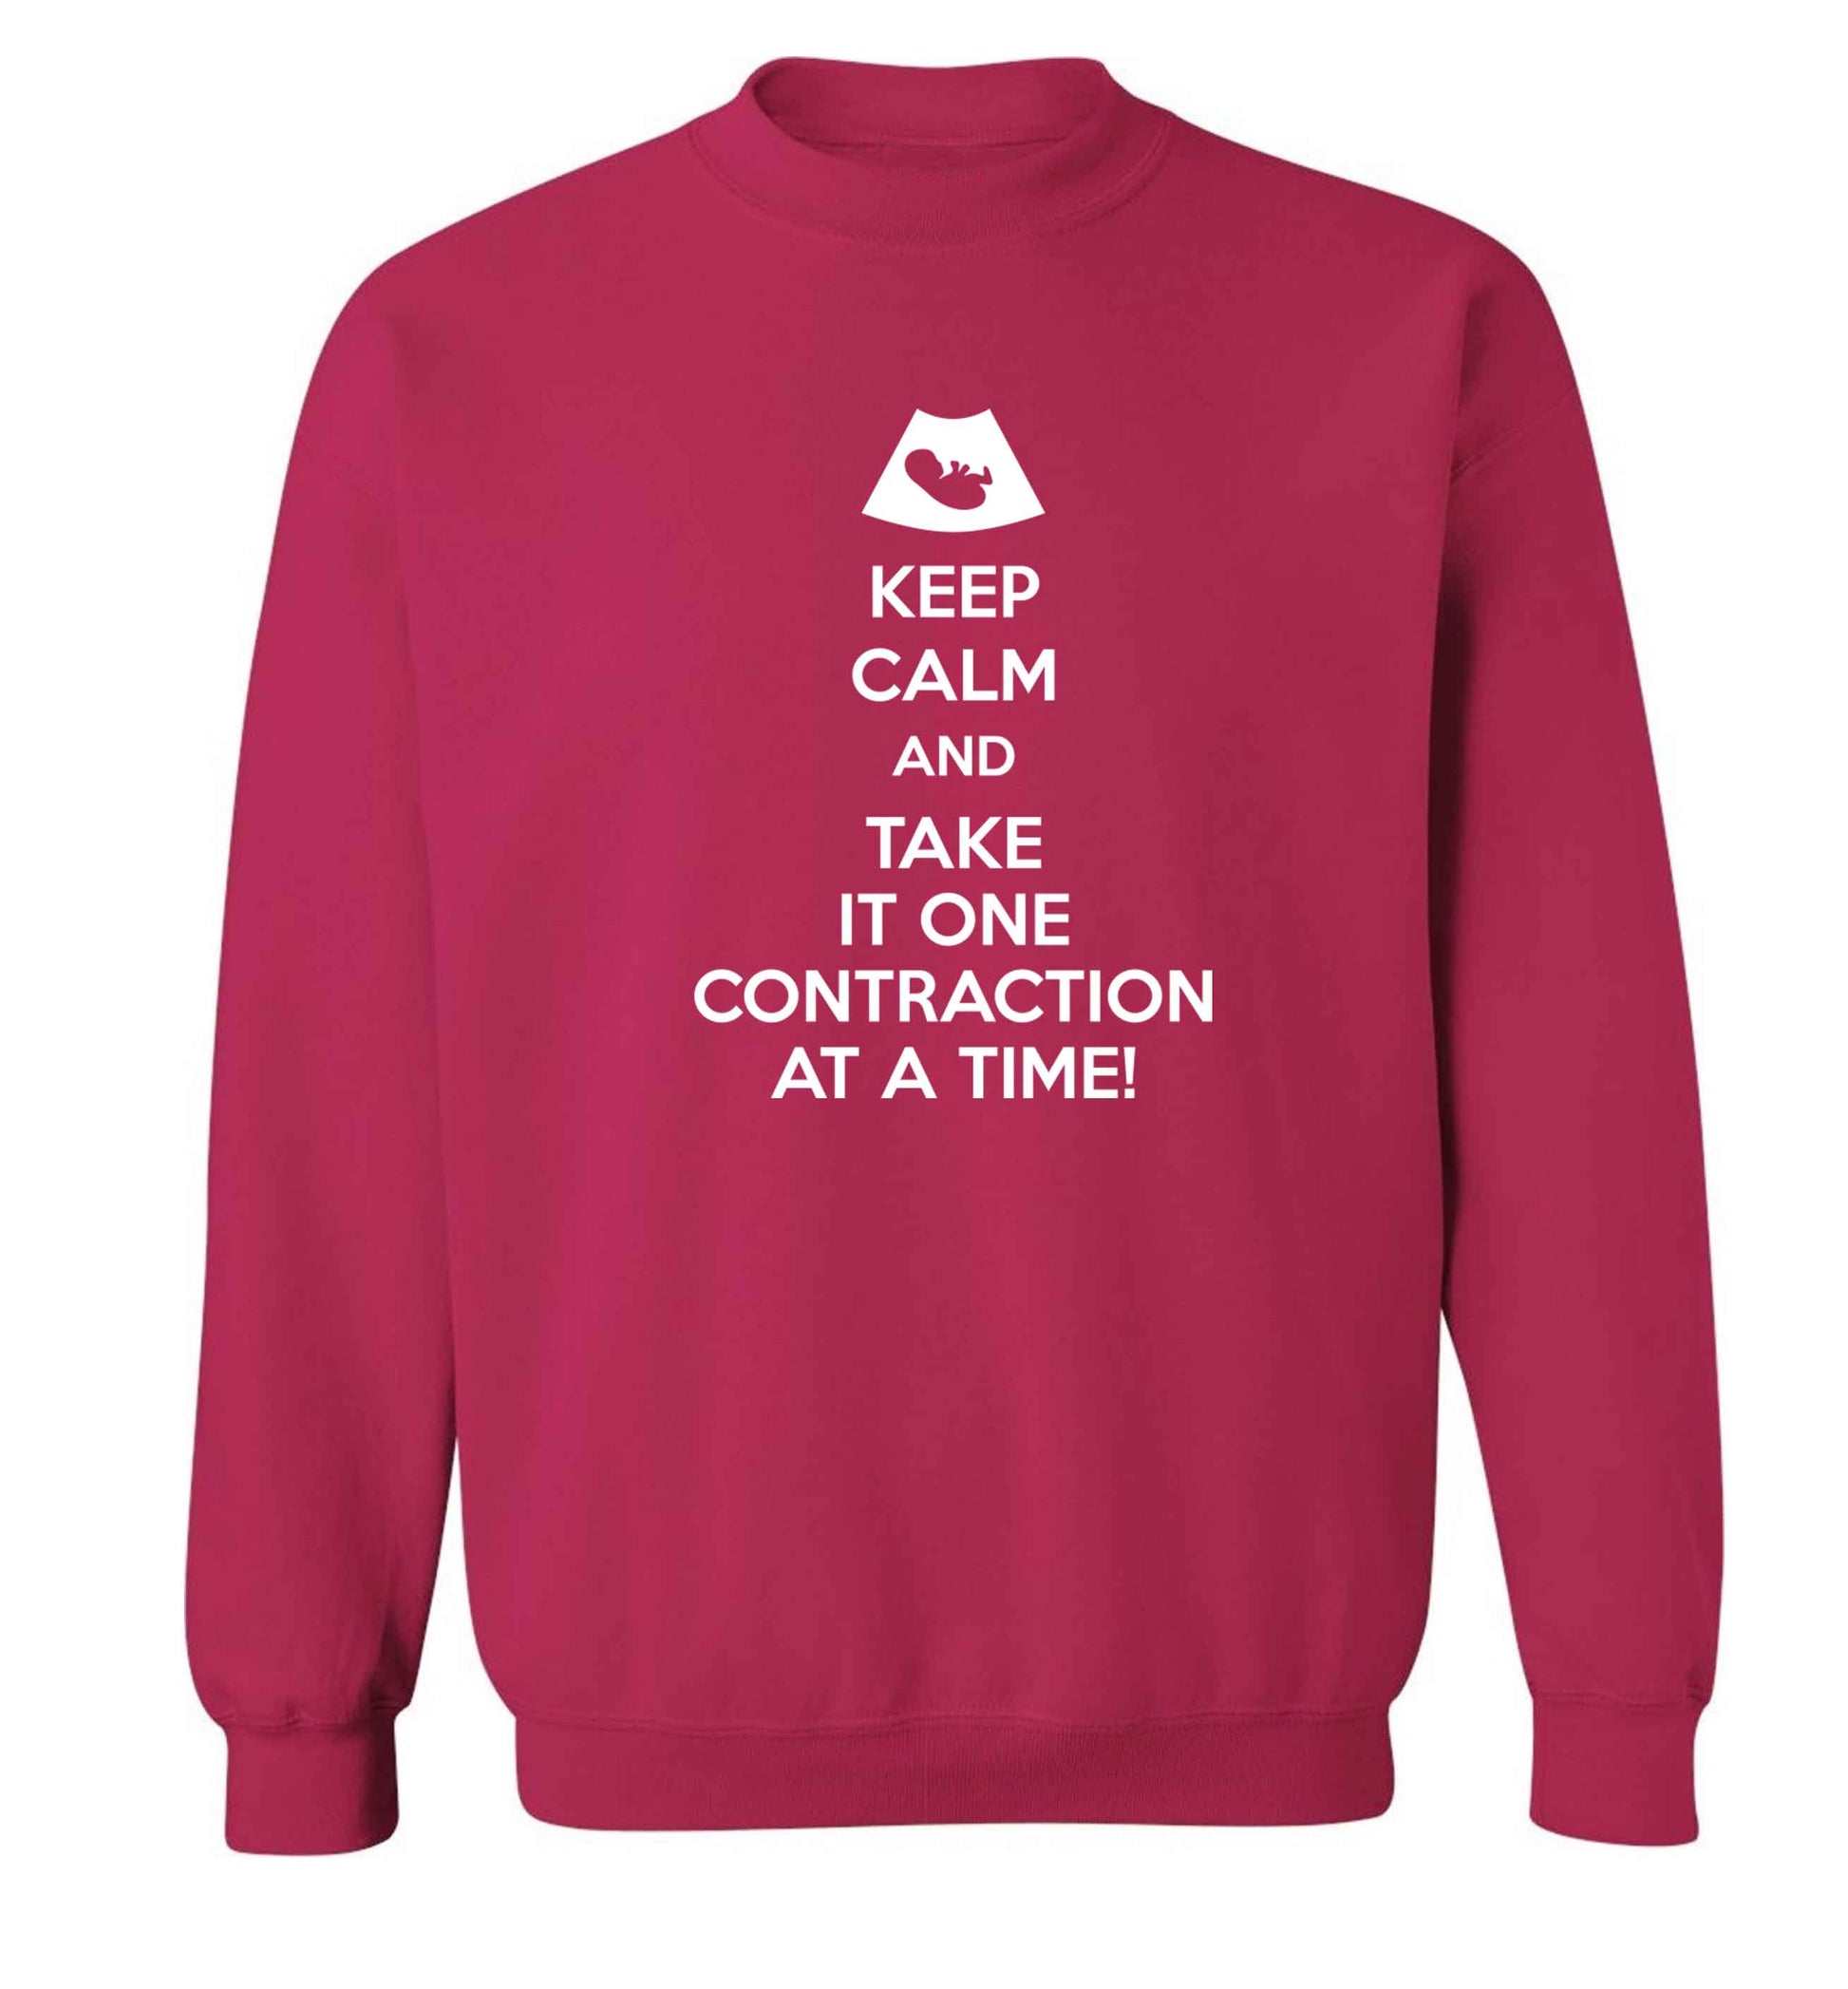 Keep calm and take it one contraction at a time Adult's unisex pink Sweater 2XL